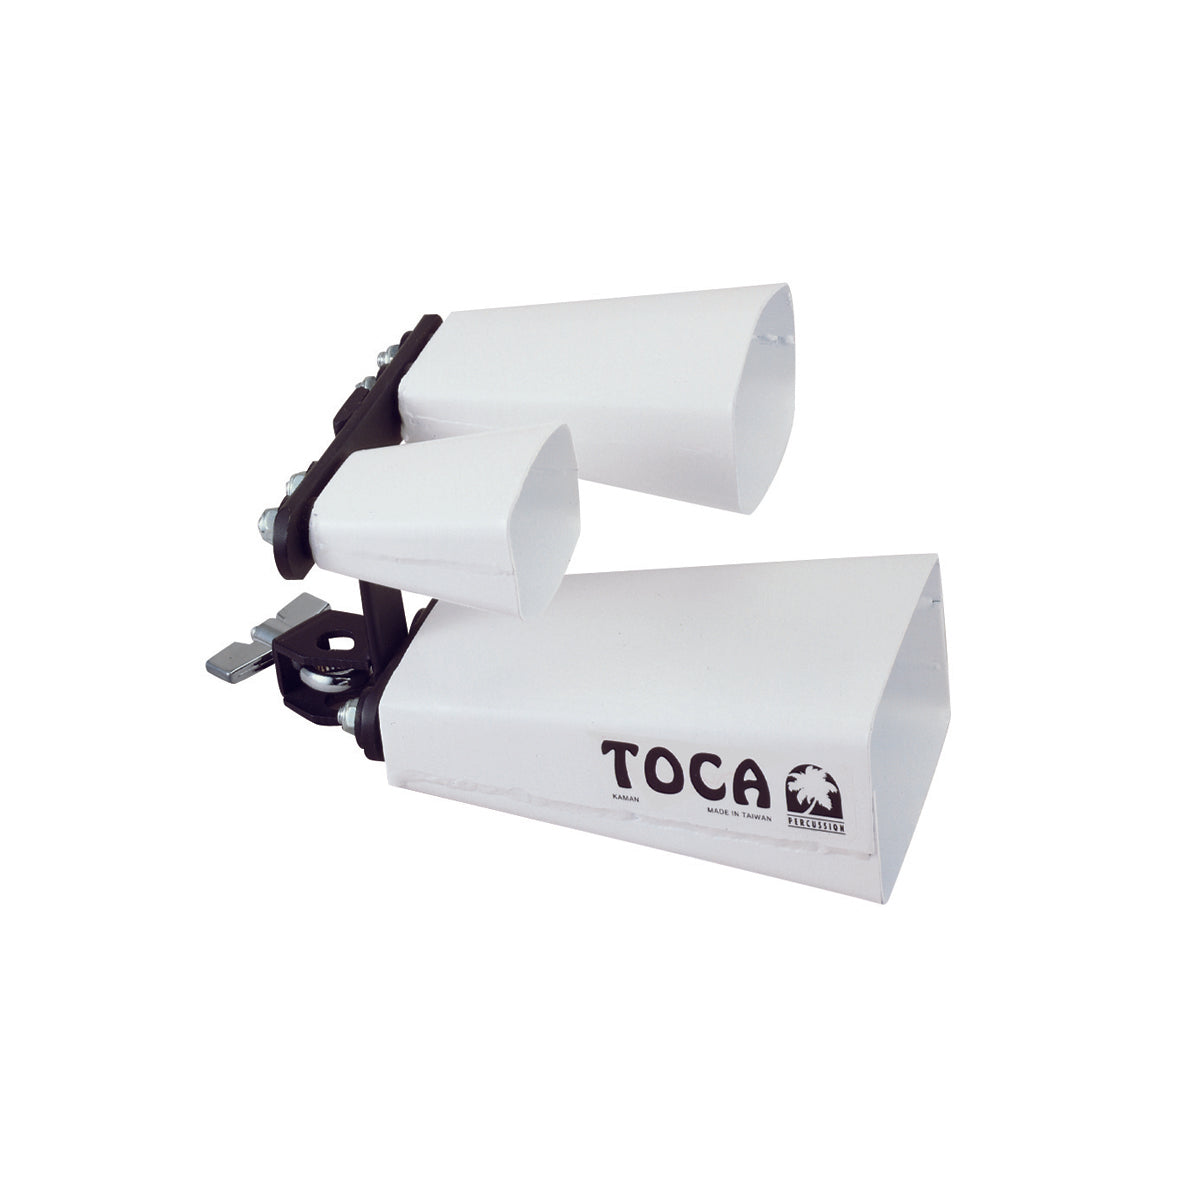 Toca Triple Fusion Bells with Mount